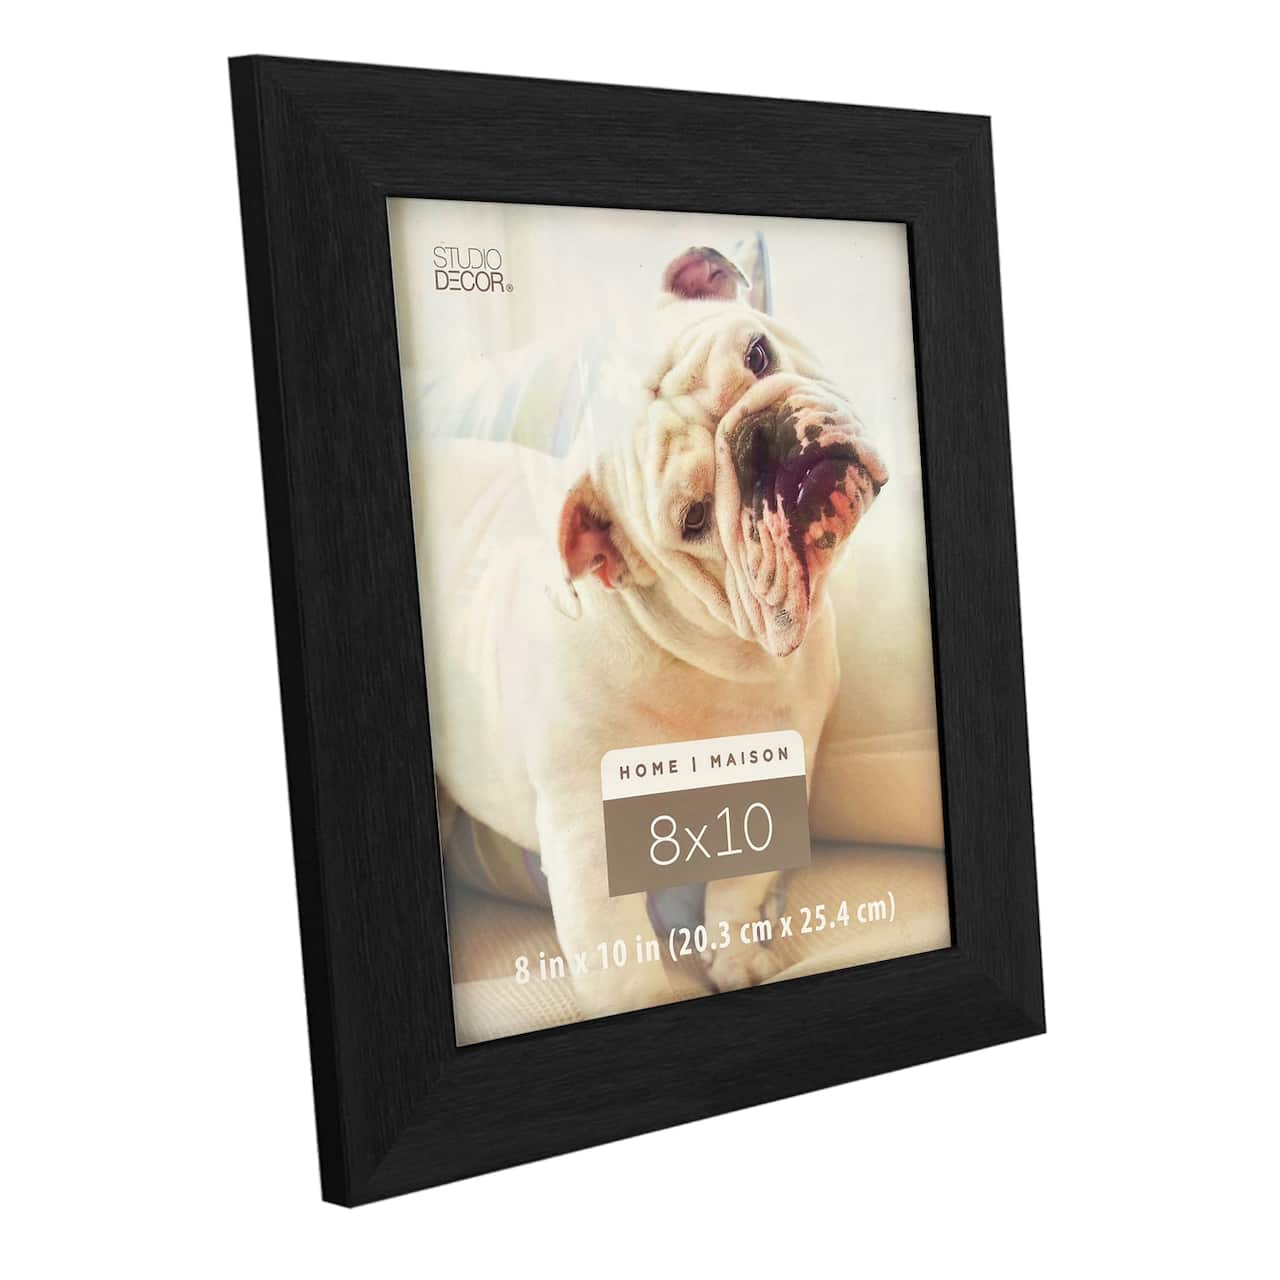 Distressed Black Frame, Home Collection By Studio D&#xE9;cor&#xAE;